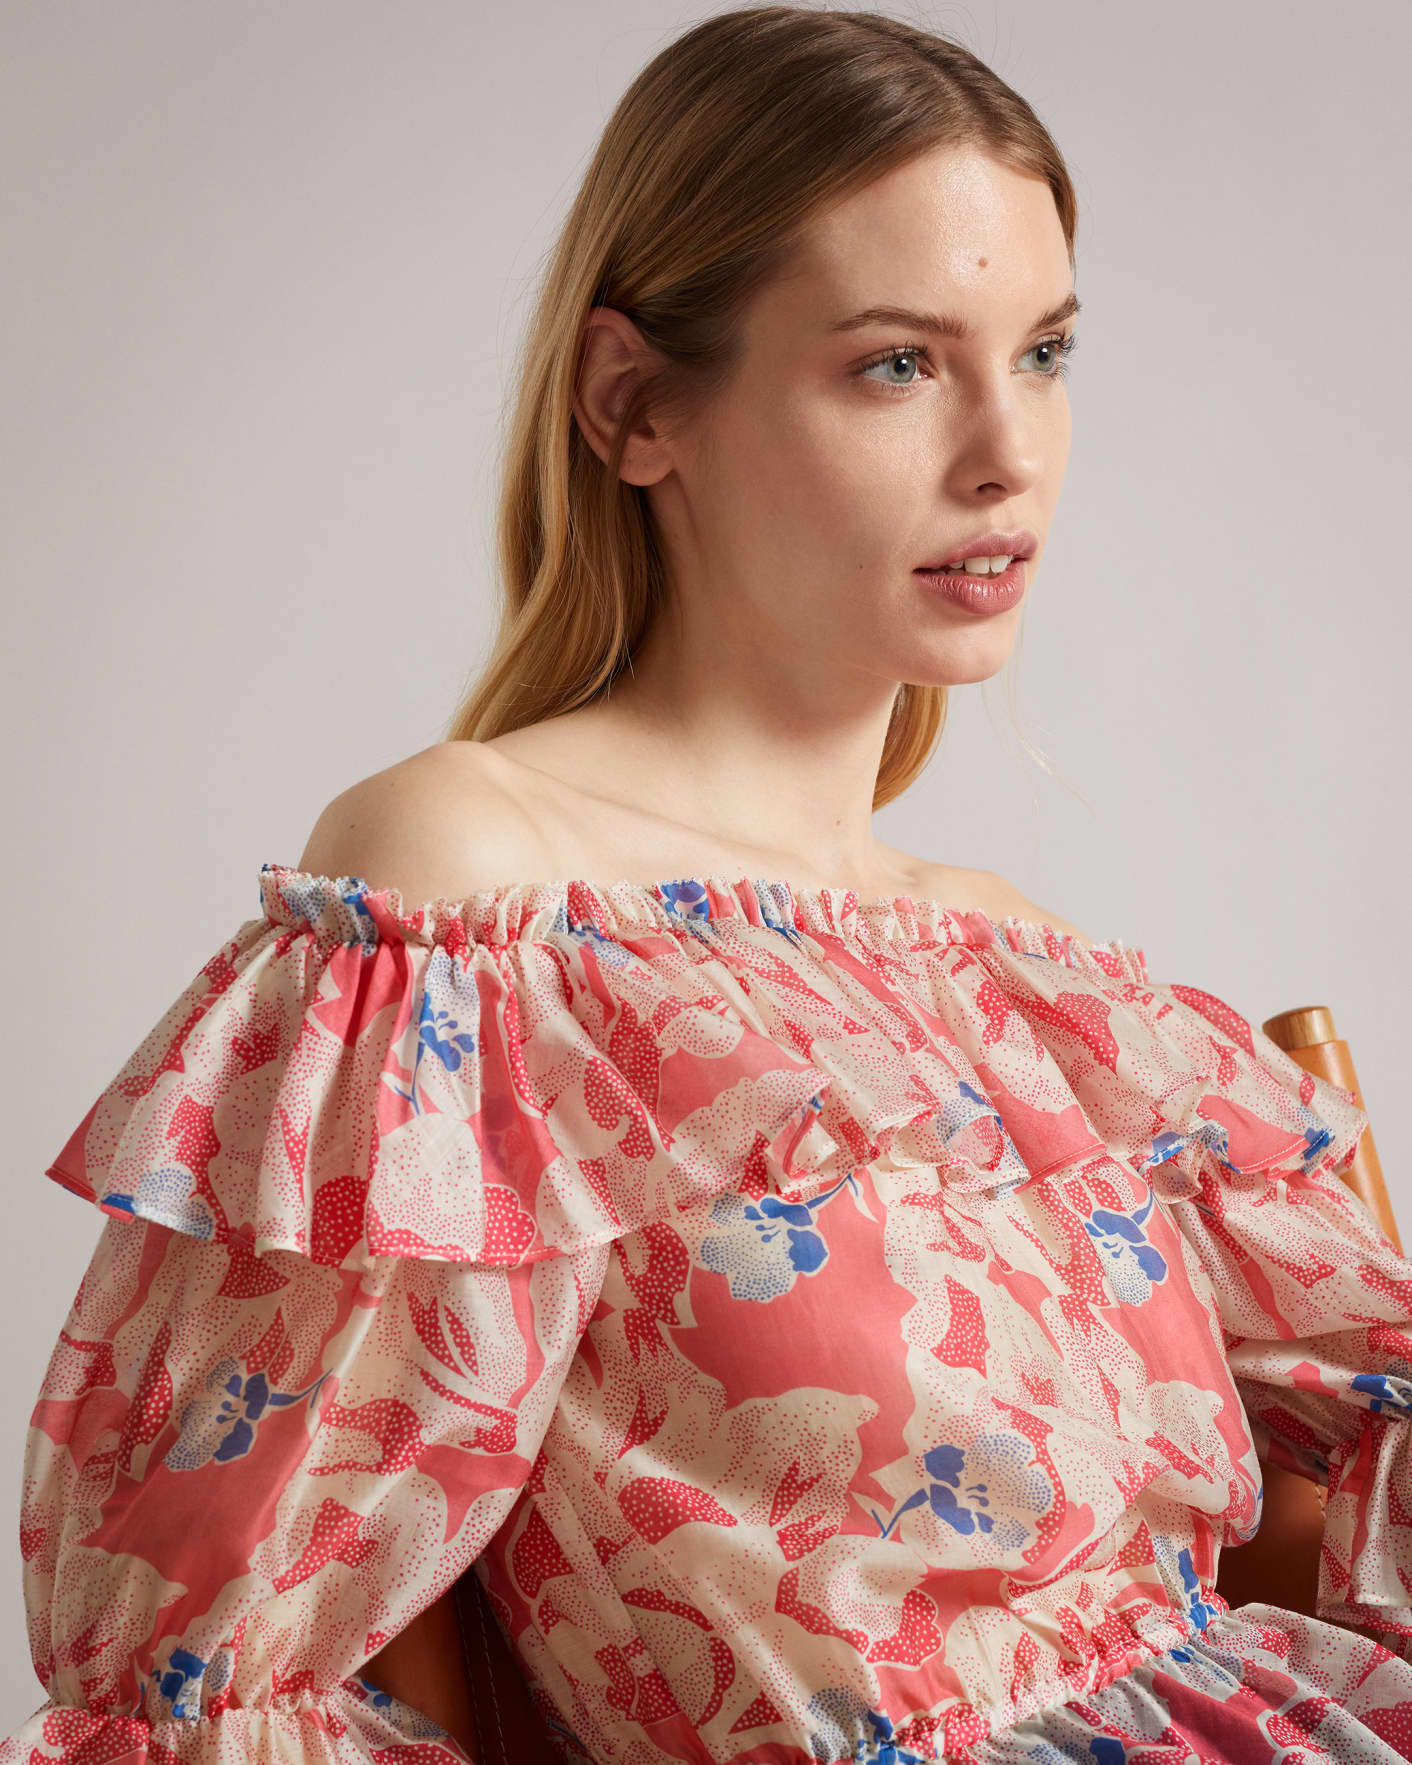 Medium Pink Off The Shoulder Top With Elasticated Waist Ted Baker